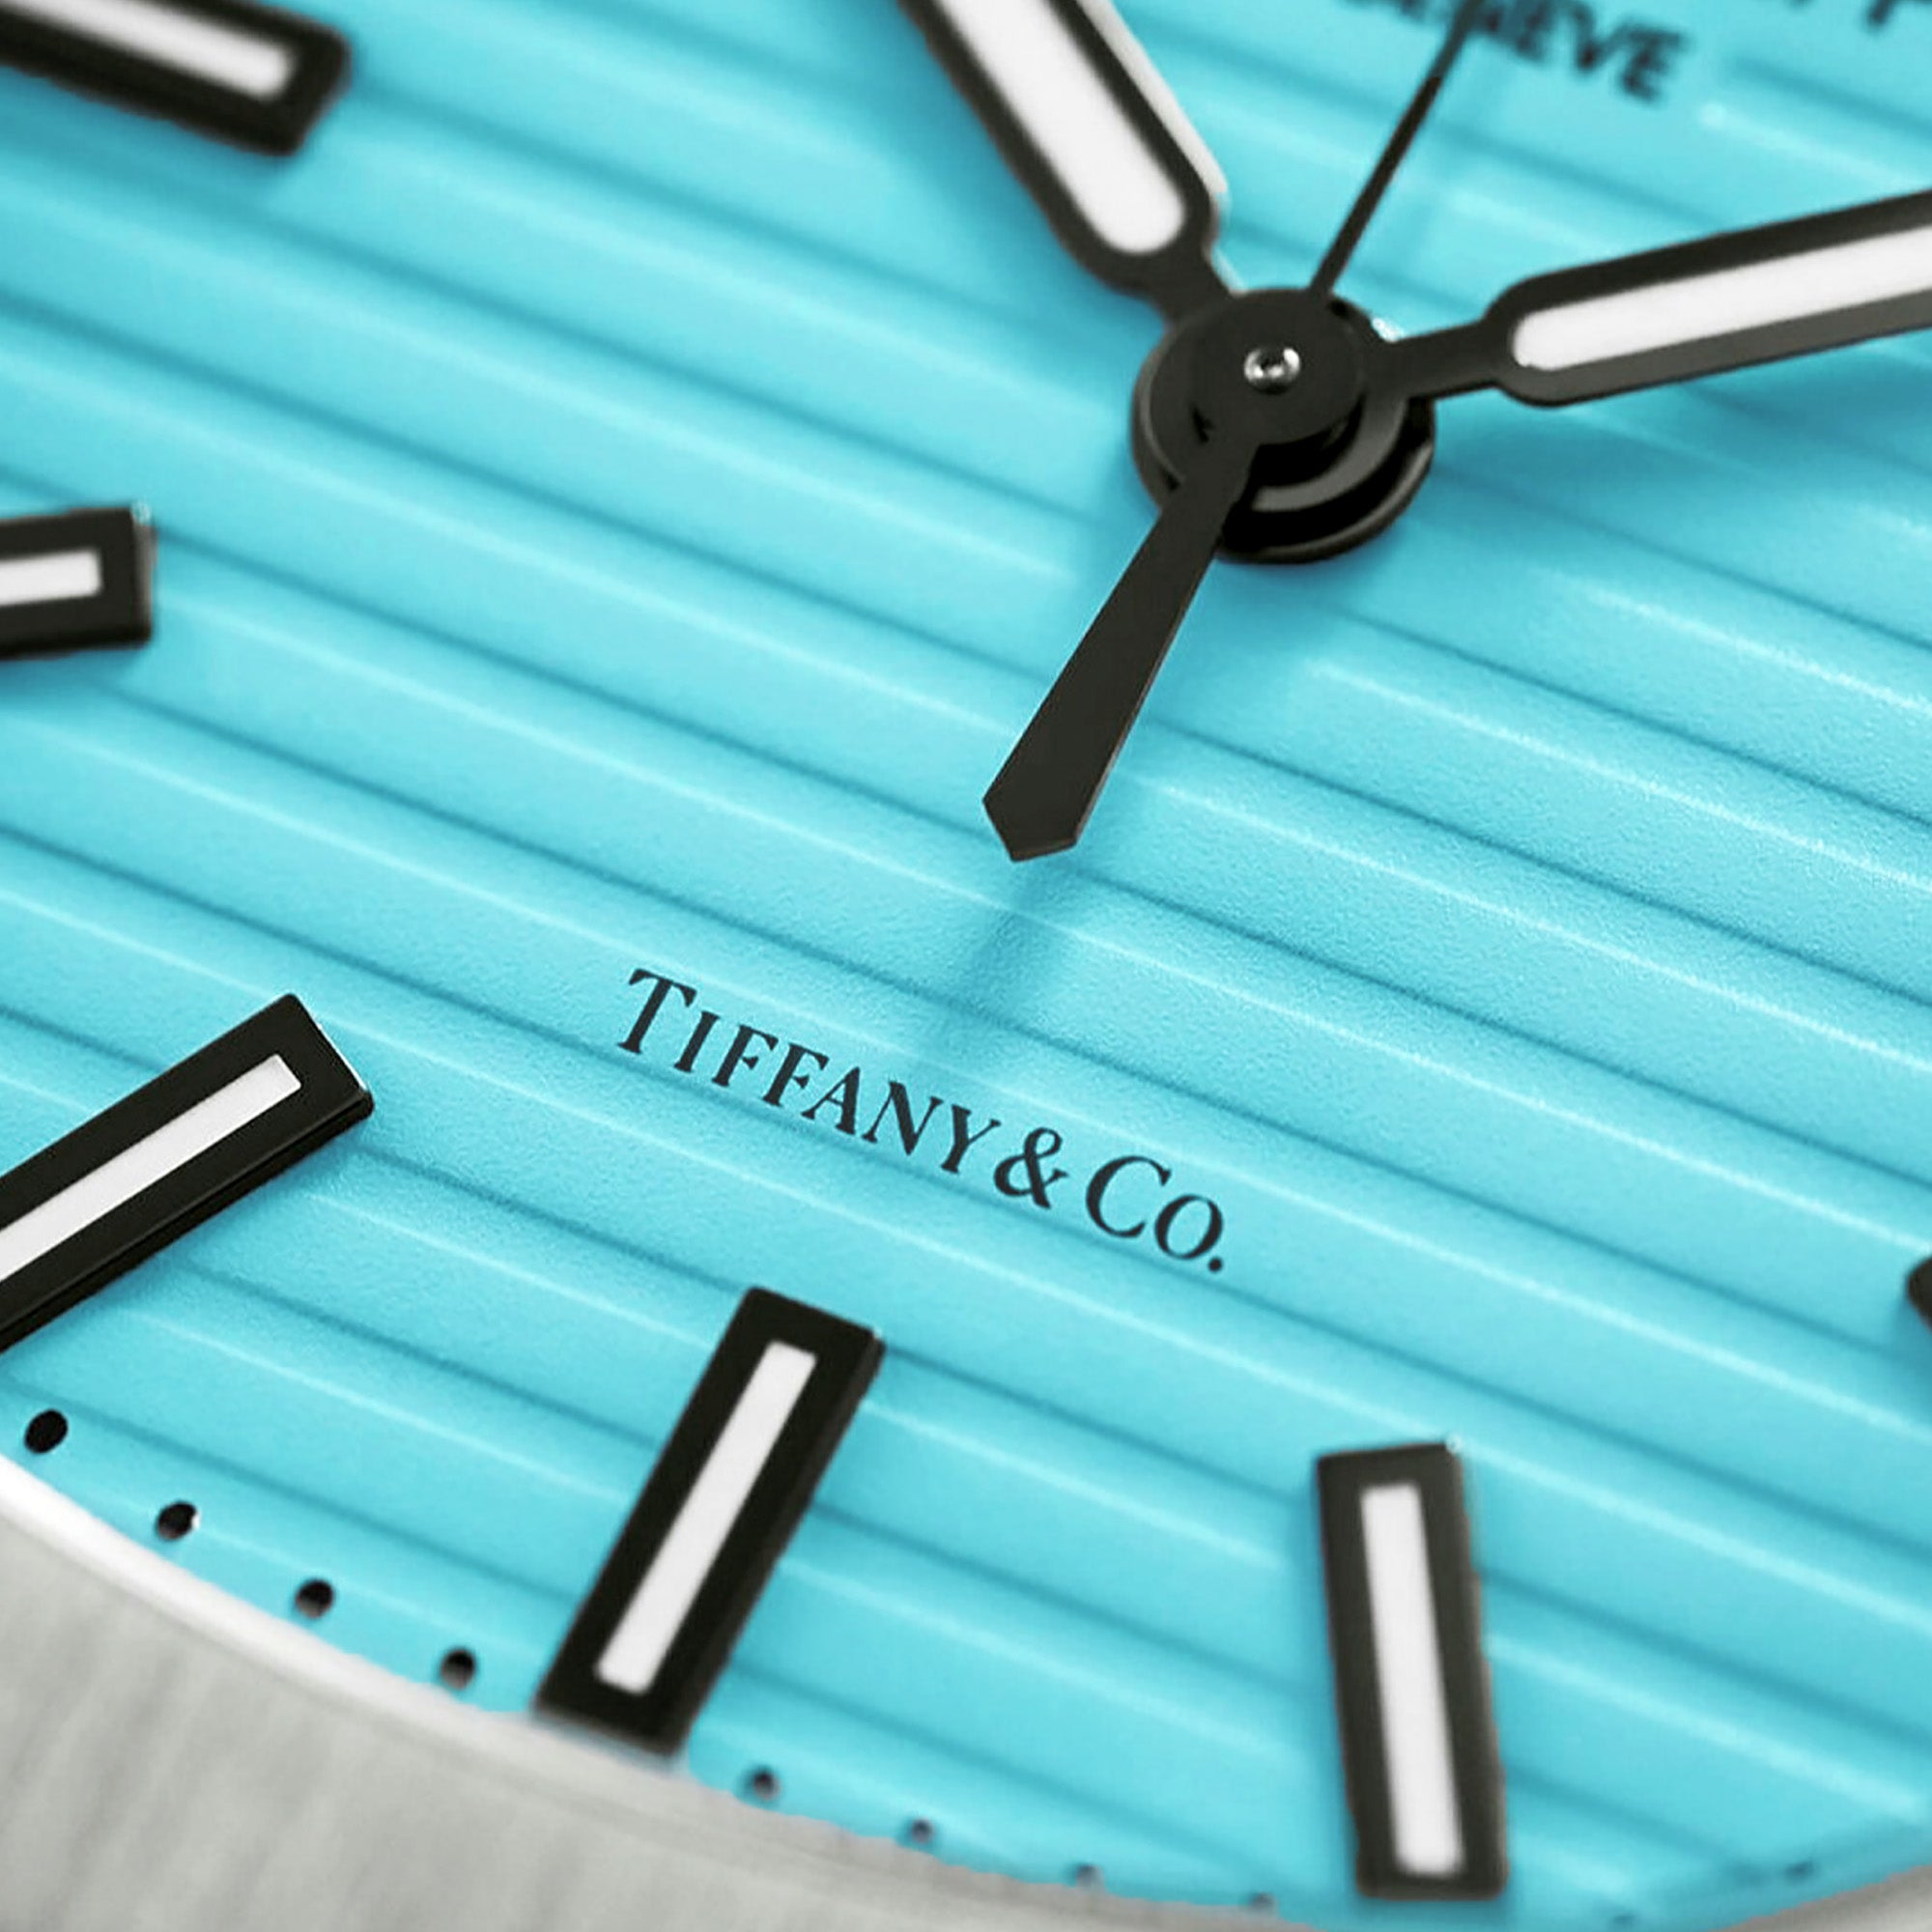 Turquoise Dial, Turquoise is the Color of Money